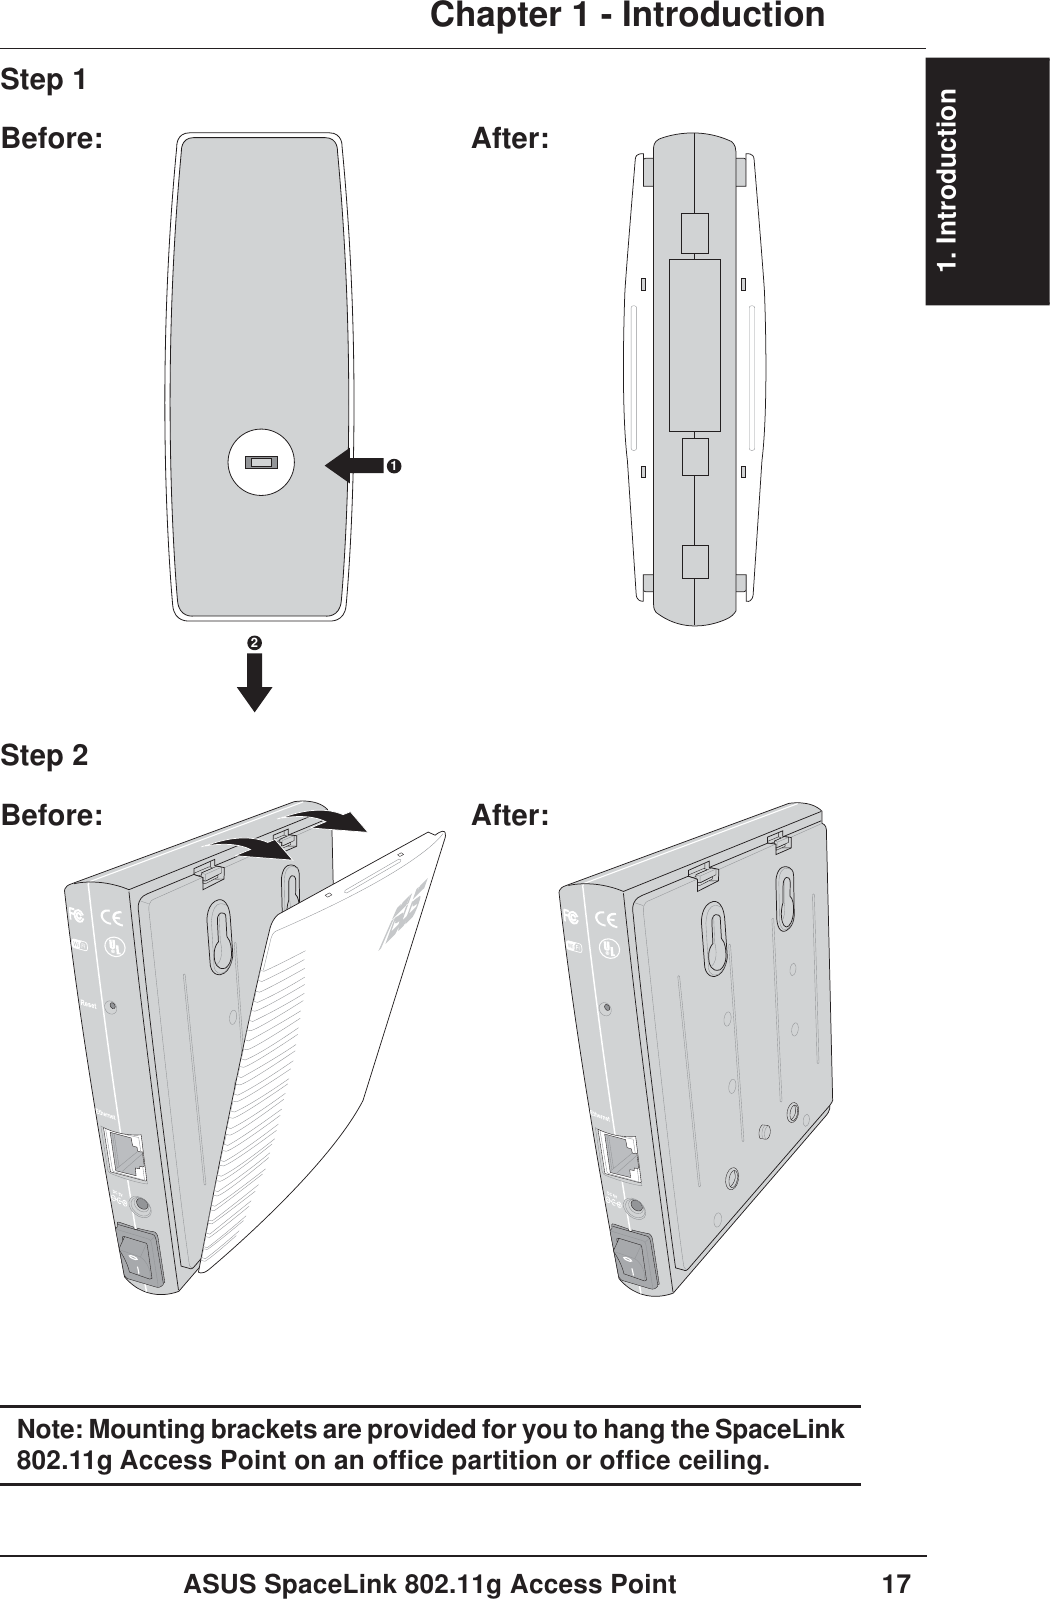 1. IntroductionASUS SpaceLink 802.11g Access Point 17Chapter 1 - Introduction12Step 1Before: After:Step 2Before: After:Note: Mounting brackets are provided for you to hang the SpaceLink802.11g Access Point on an office partition or office ceiling.